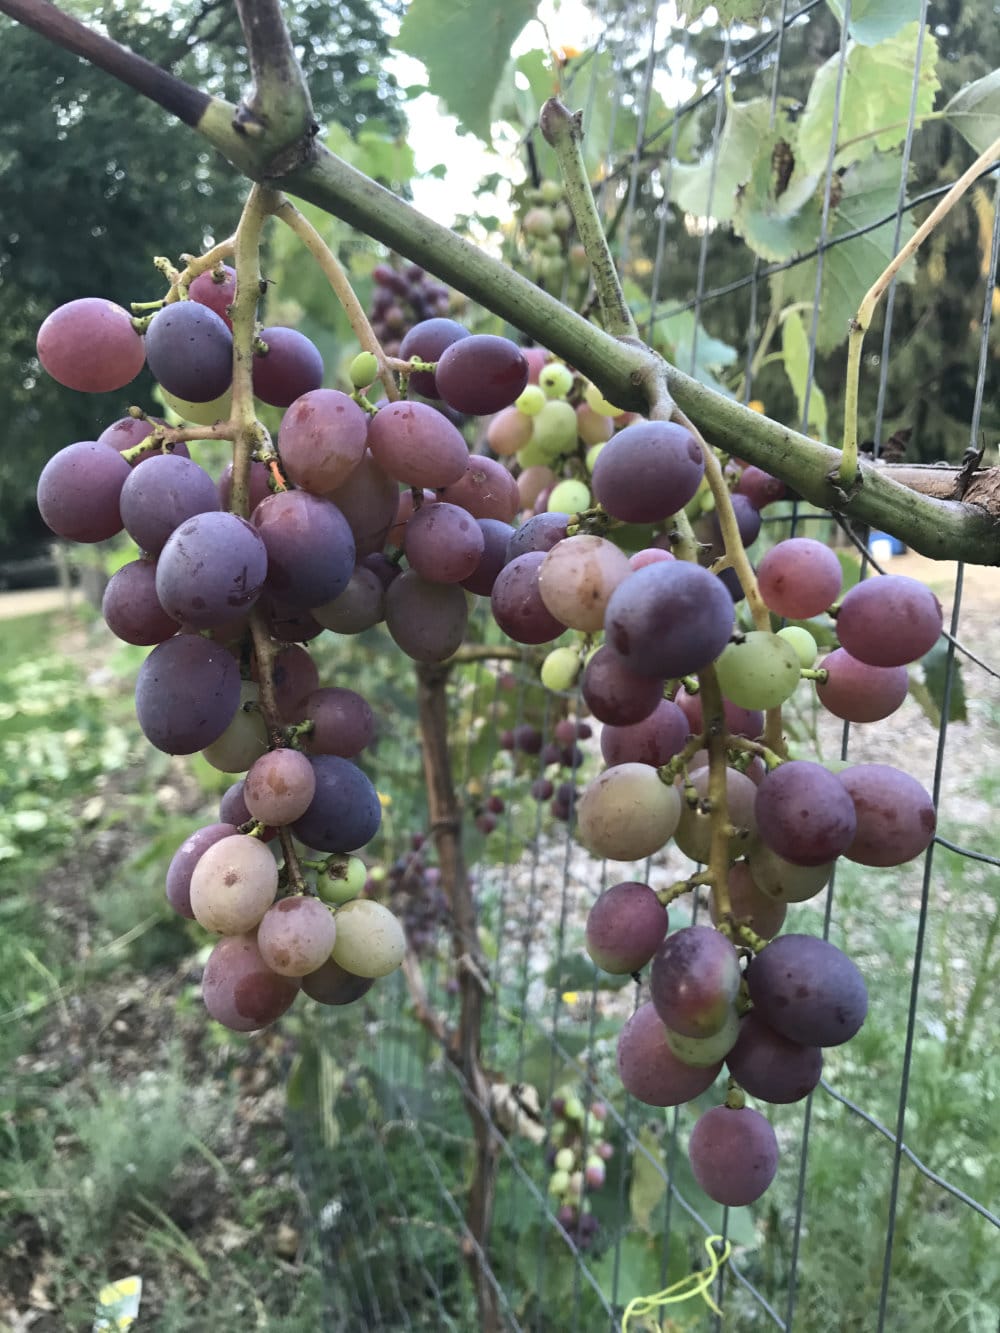 Grapes growing on a vine near the gates.